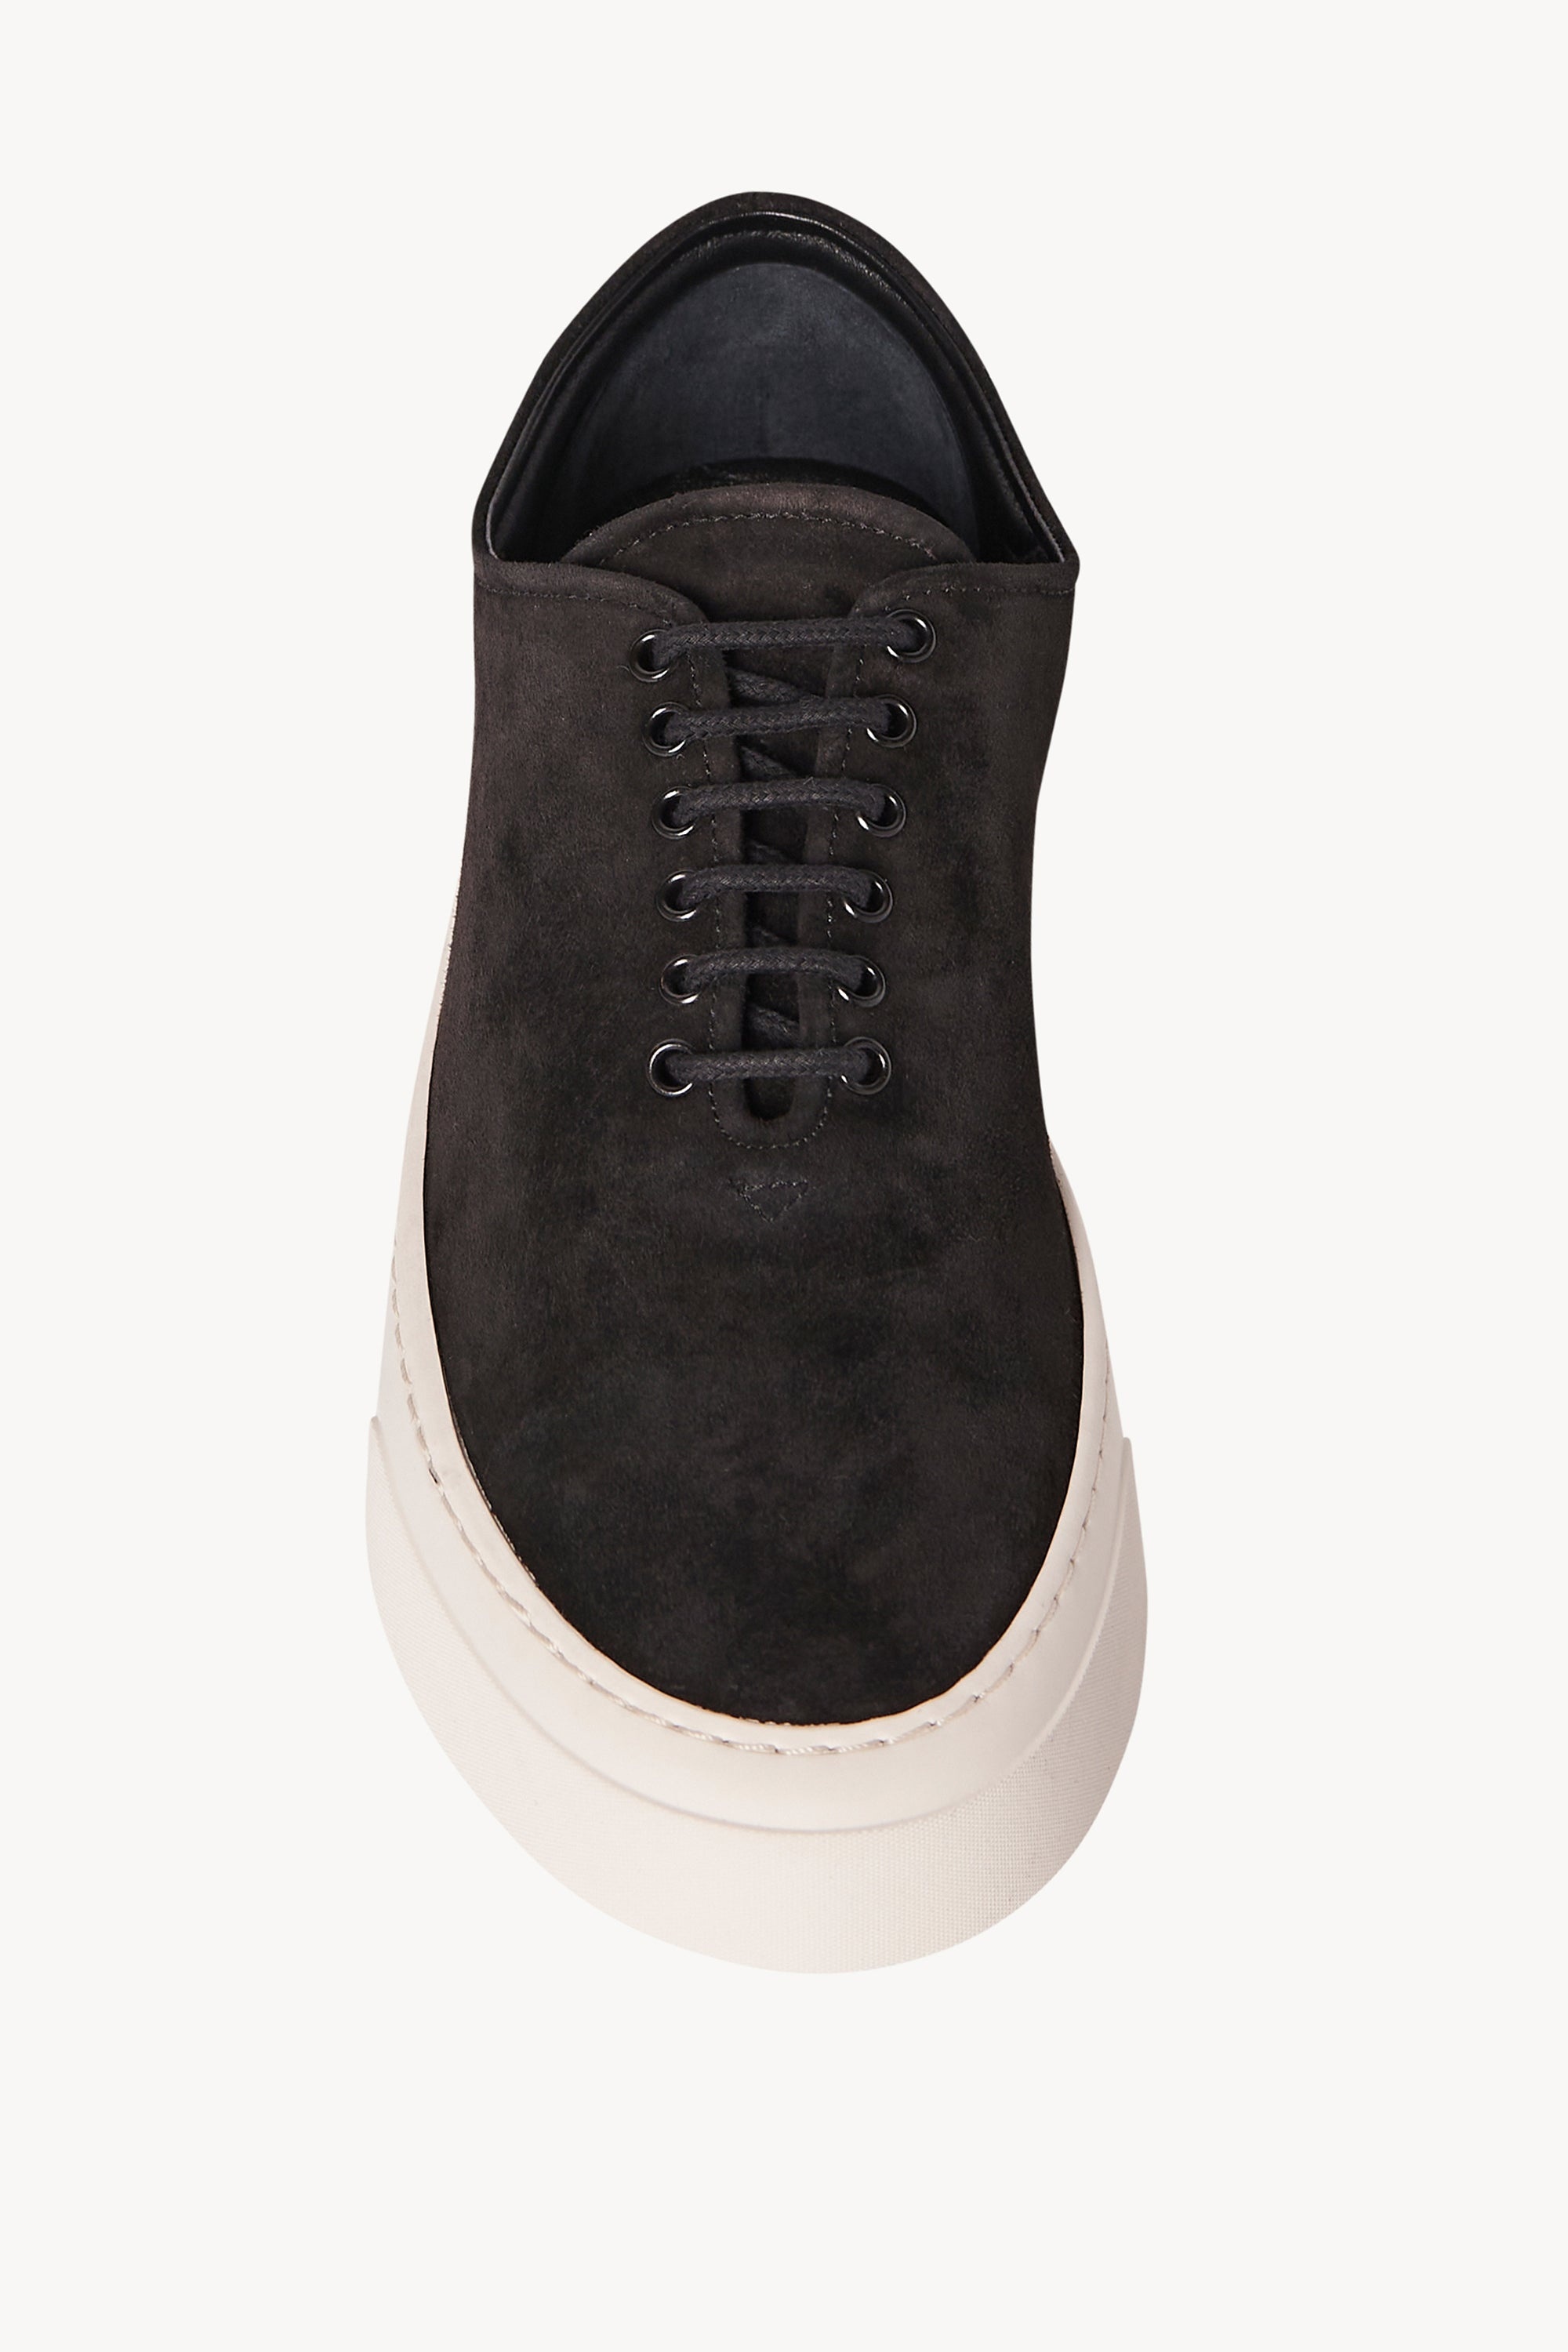 Marie H Lace-Up Sneaker in Suede - 3